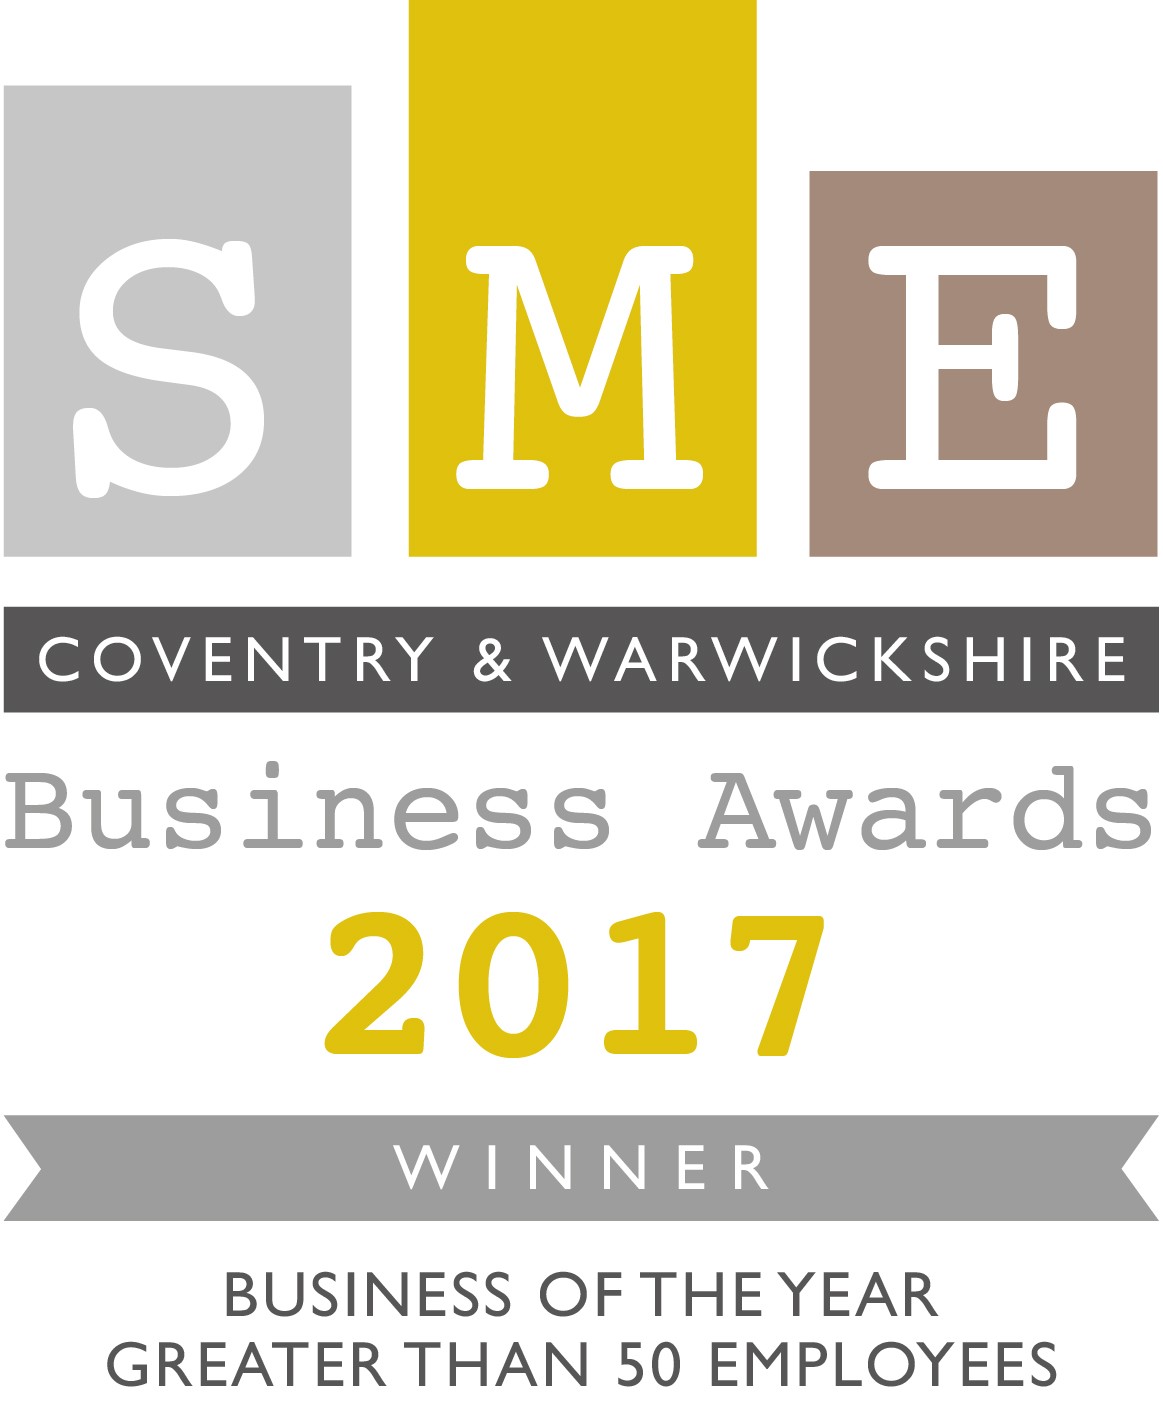 Coventry and Warwickshire Business Awards 2017 Winner